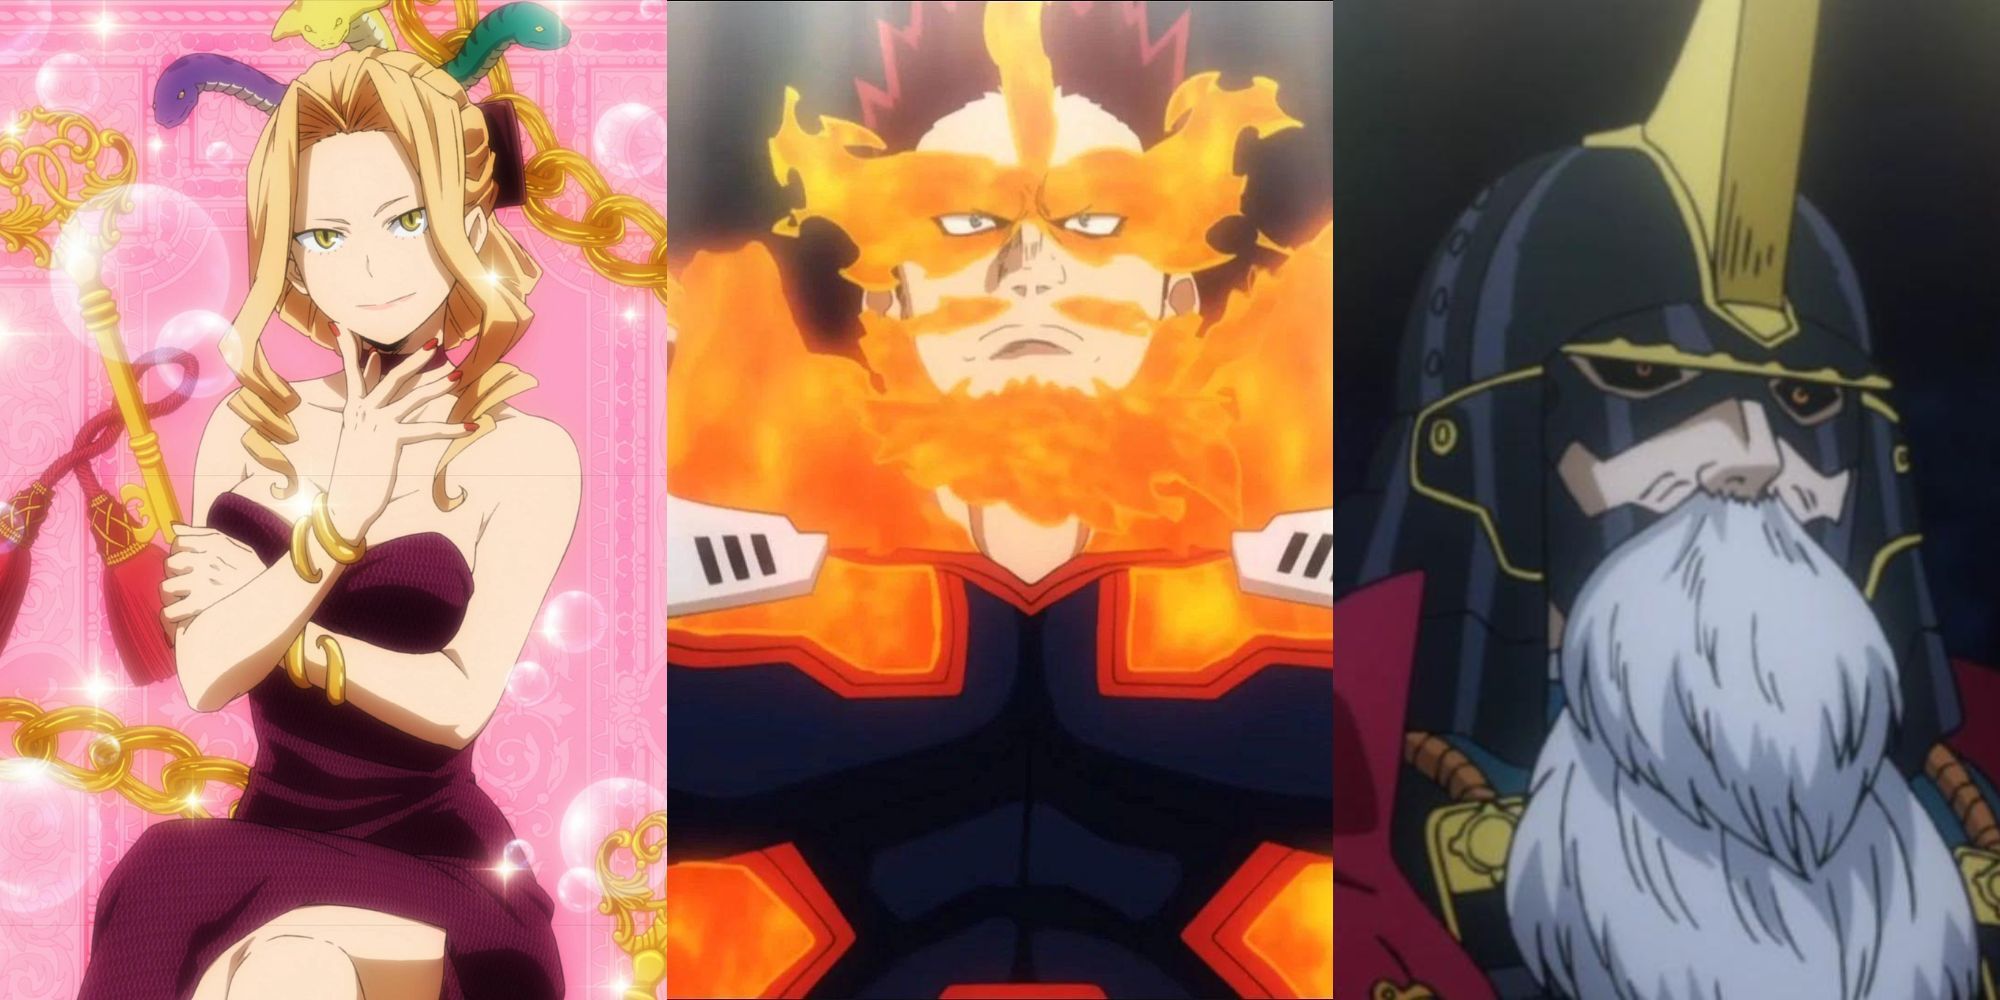 A collage of some Pro Heroes who should've never become heroes: Uwabami, Endeavor and Yoroi Musha.